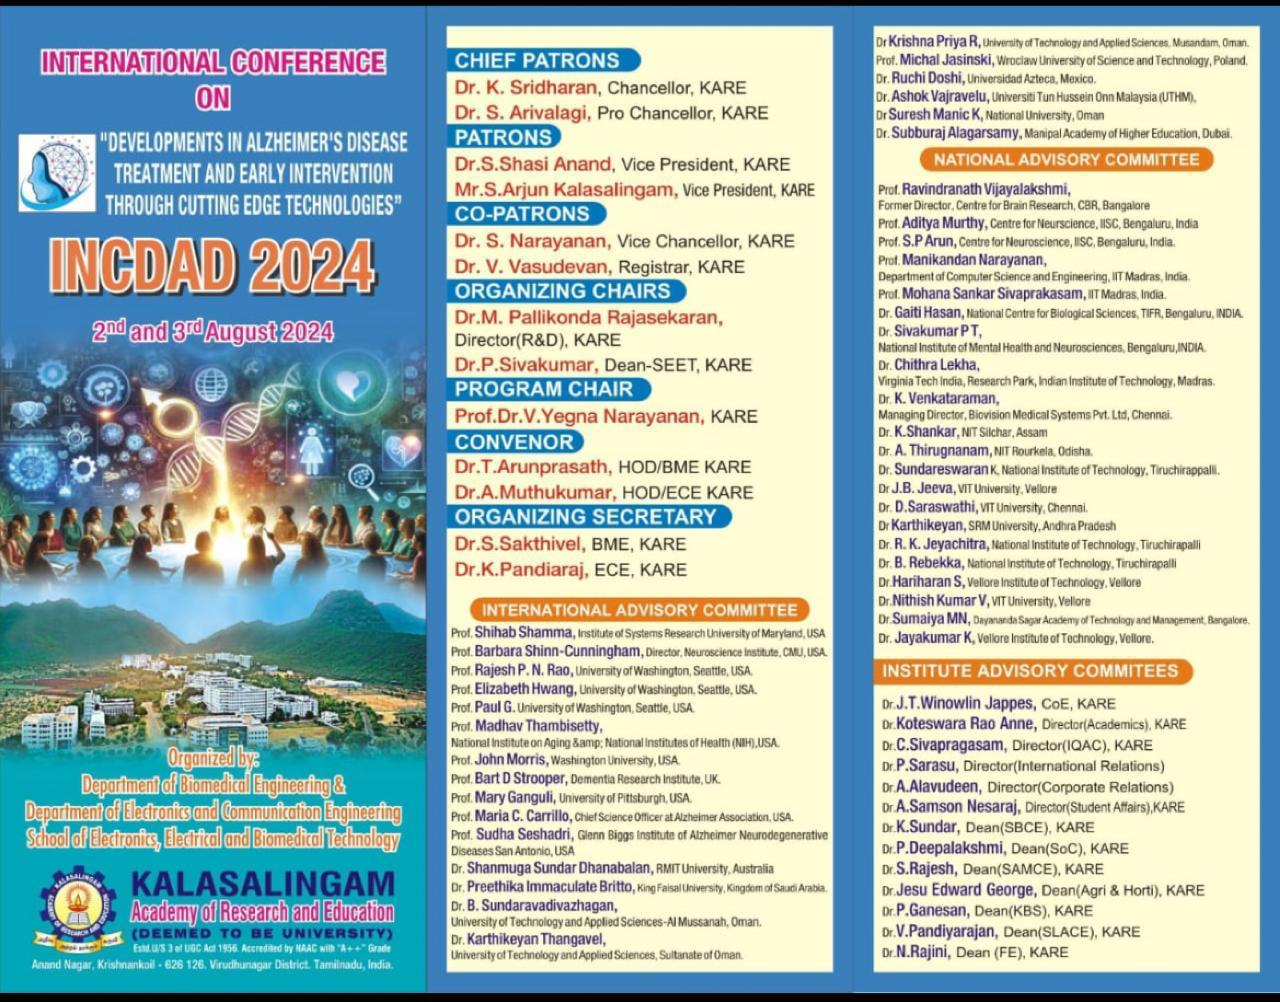 International Conference on "Developments in Alzheimer's Disease Treatment and Early Intervention through Cutting Edge Technologies" (INCDAD 2024), Virudhunagar, Tamil Nadu, India